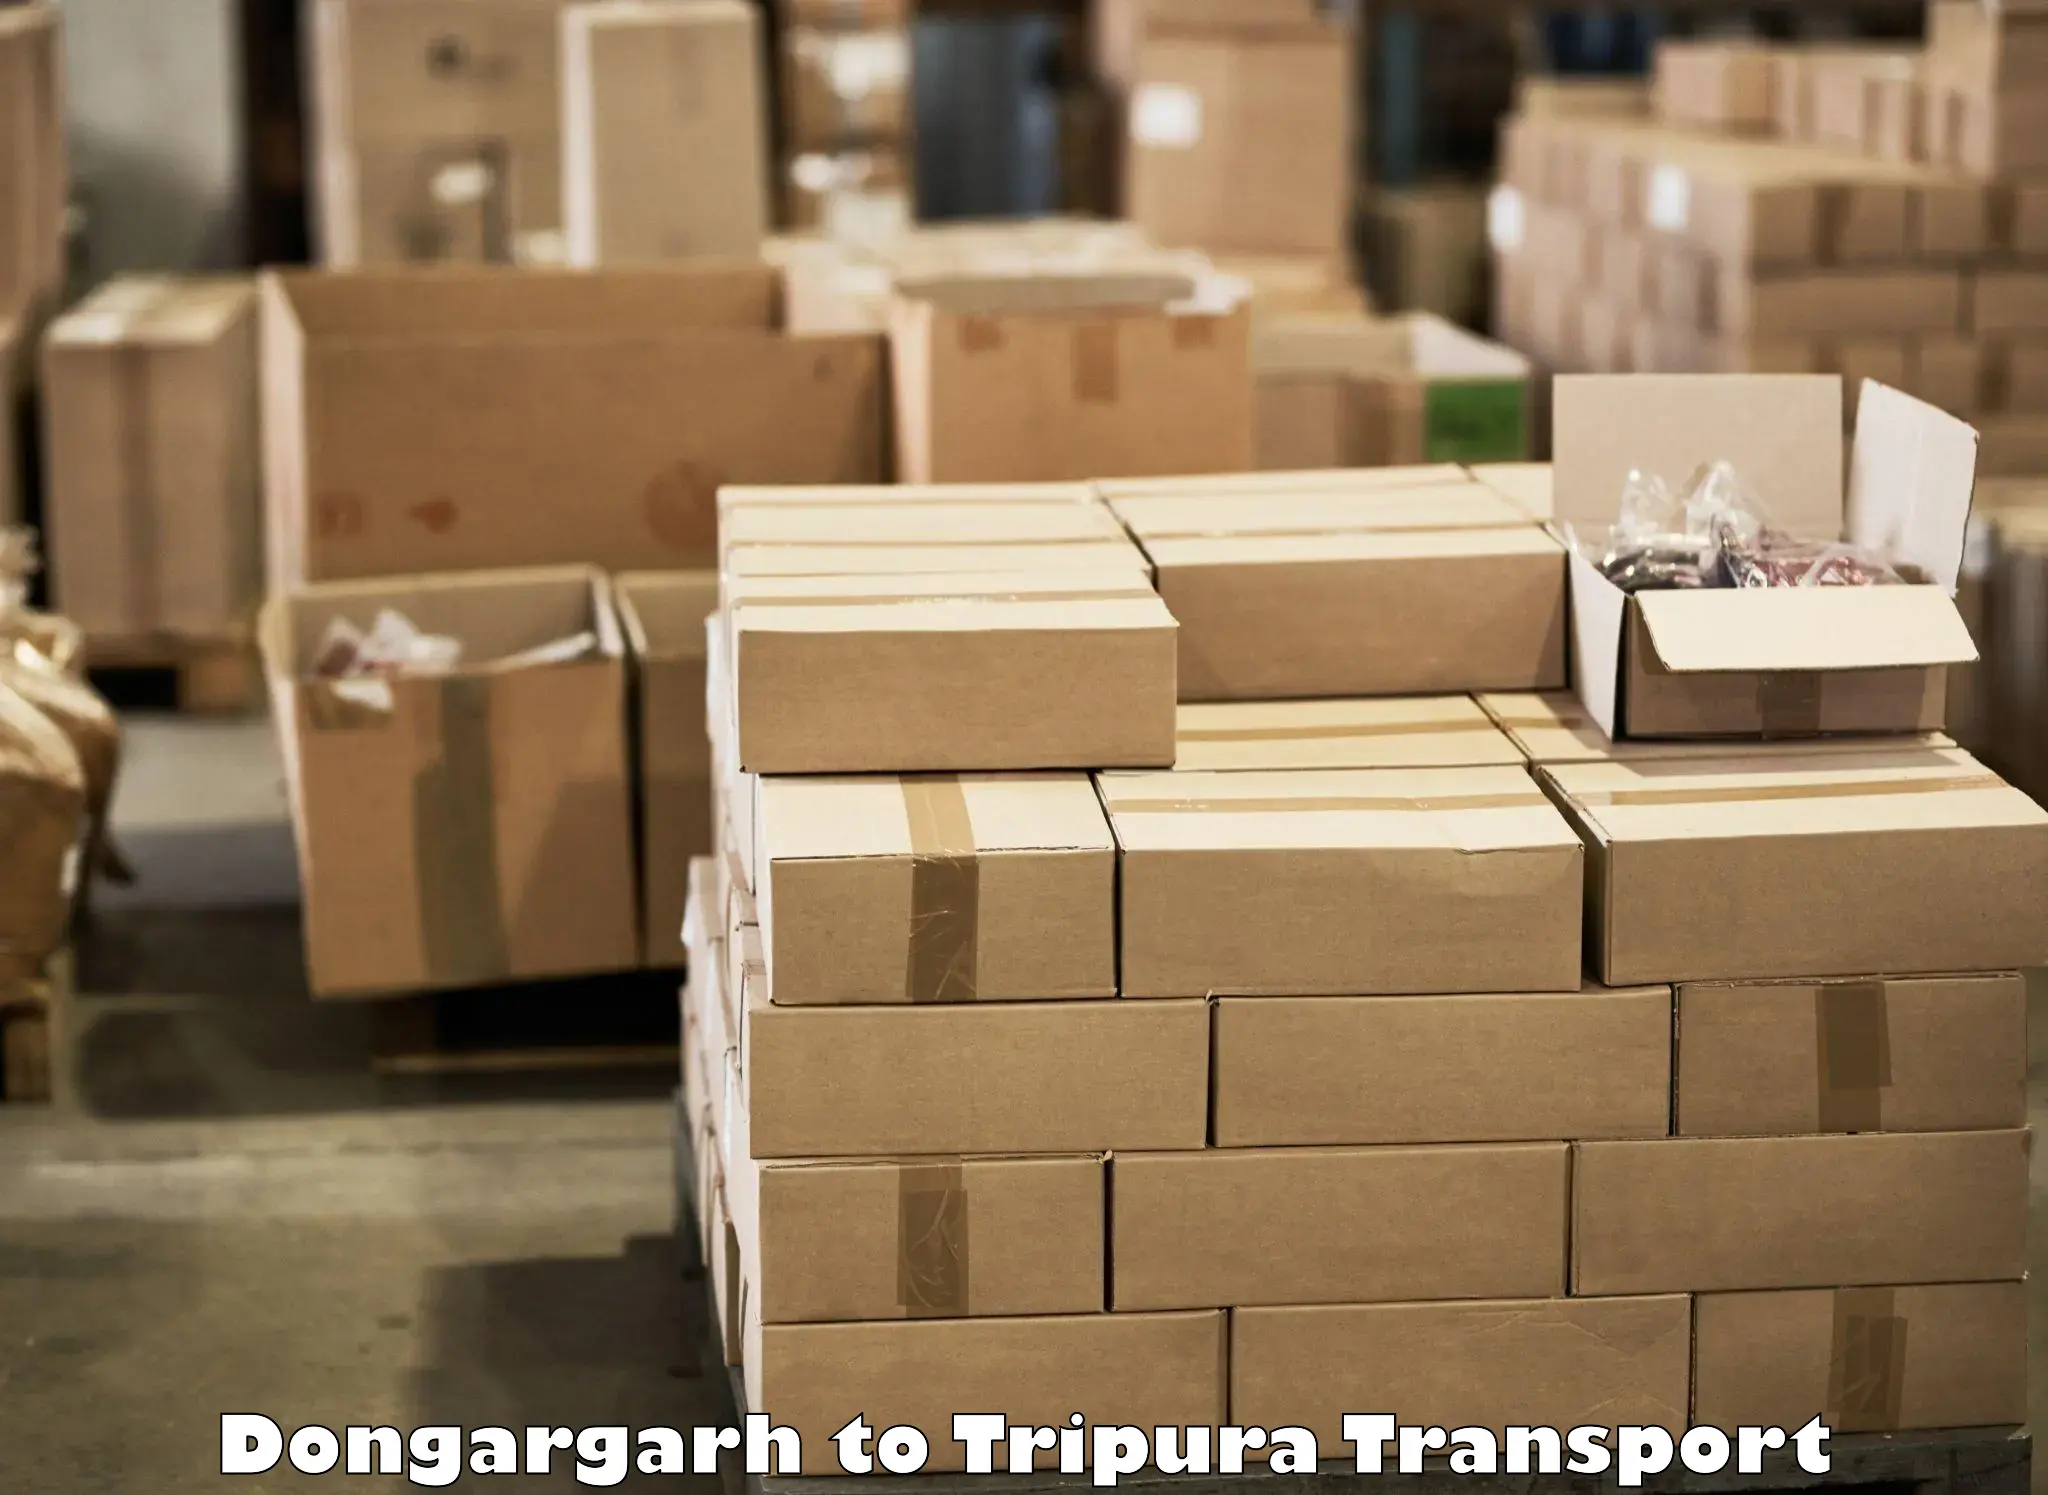 Container transportation services in Dongargarh to Manu Bazar